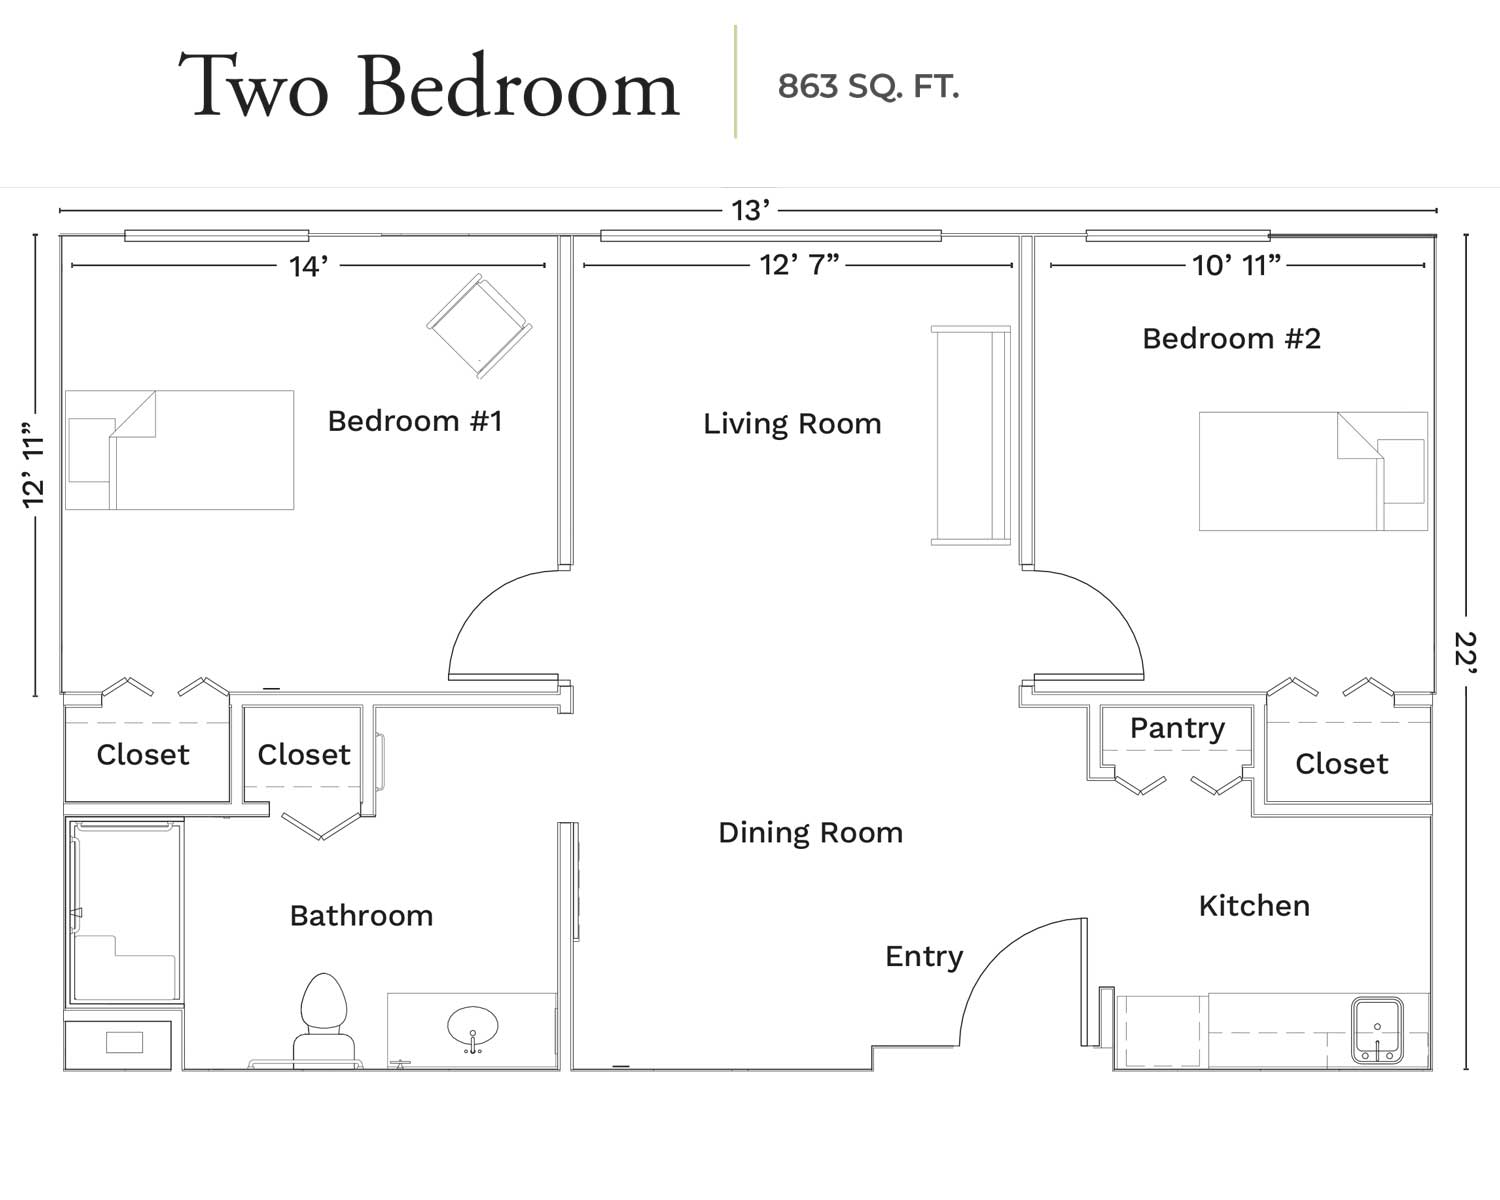 Floor plan of a two-bedroom apartment with 863 square feet, featuring living room, dining room, kitchen, and bathroom.